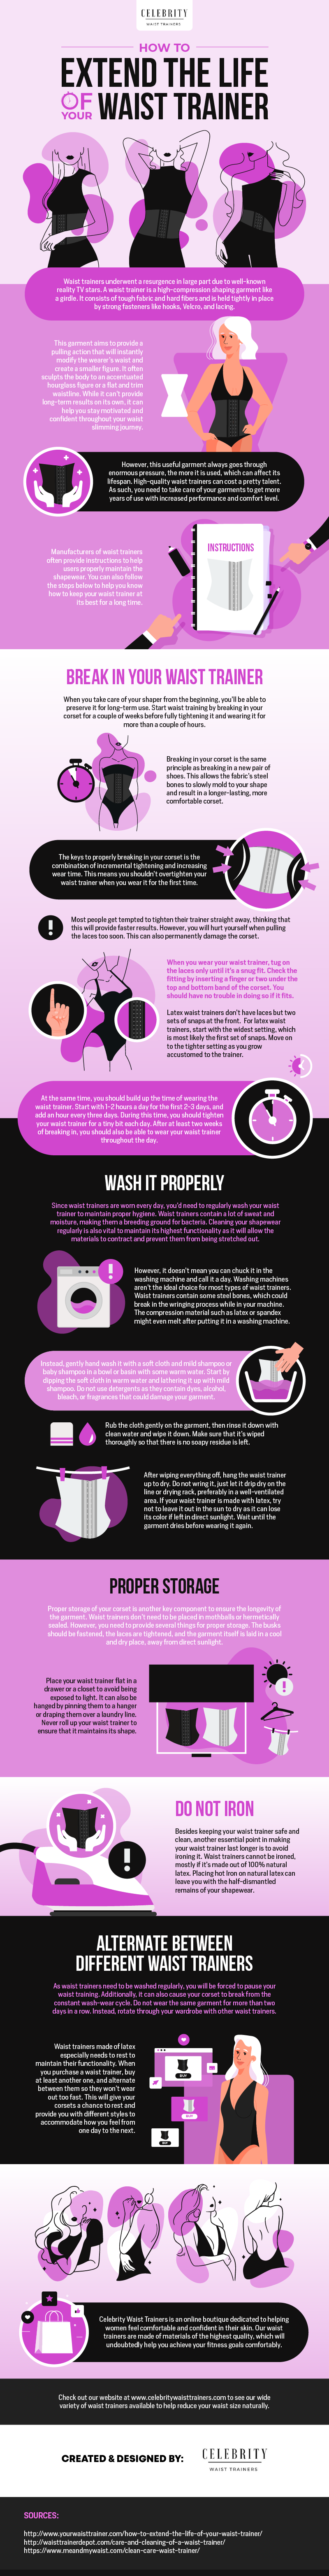 How to Extend the Lifespan of your Waist Trainer - Infographic